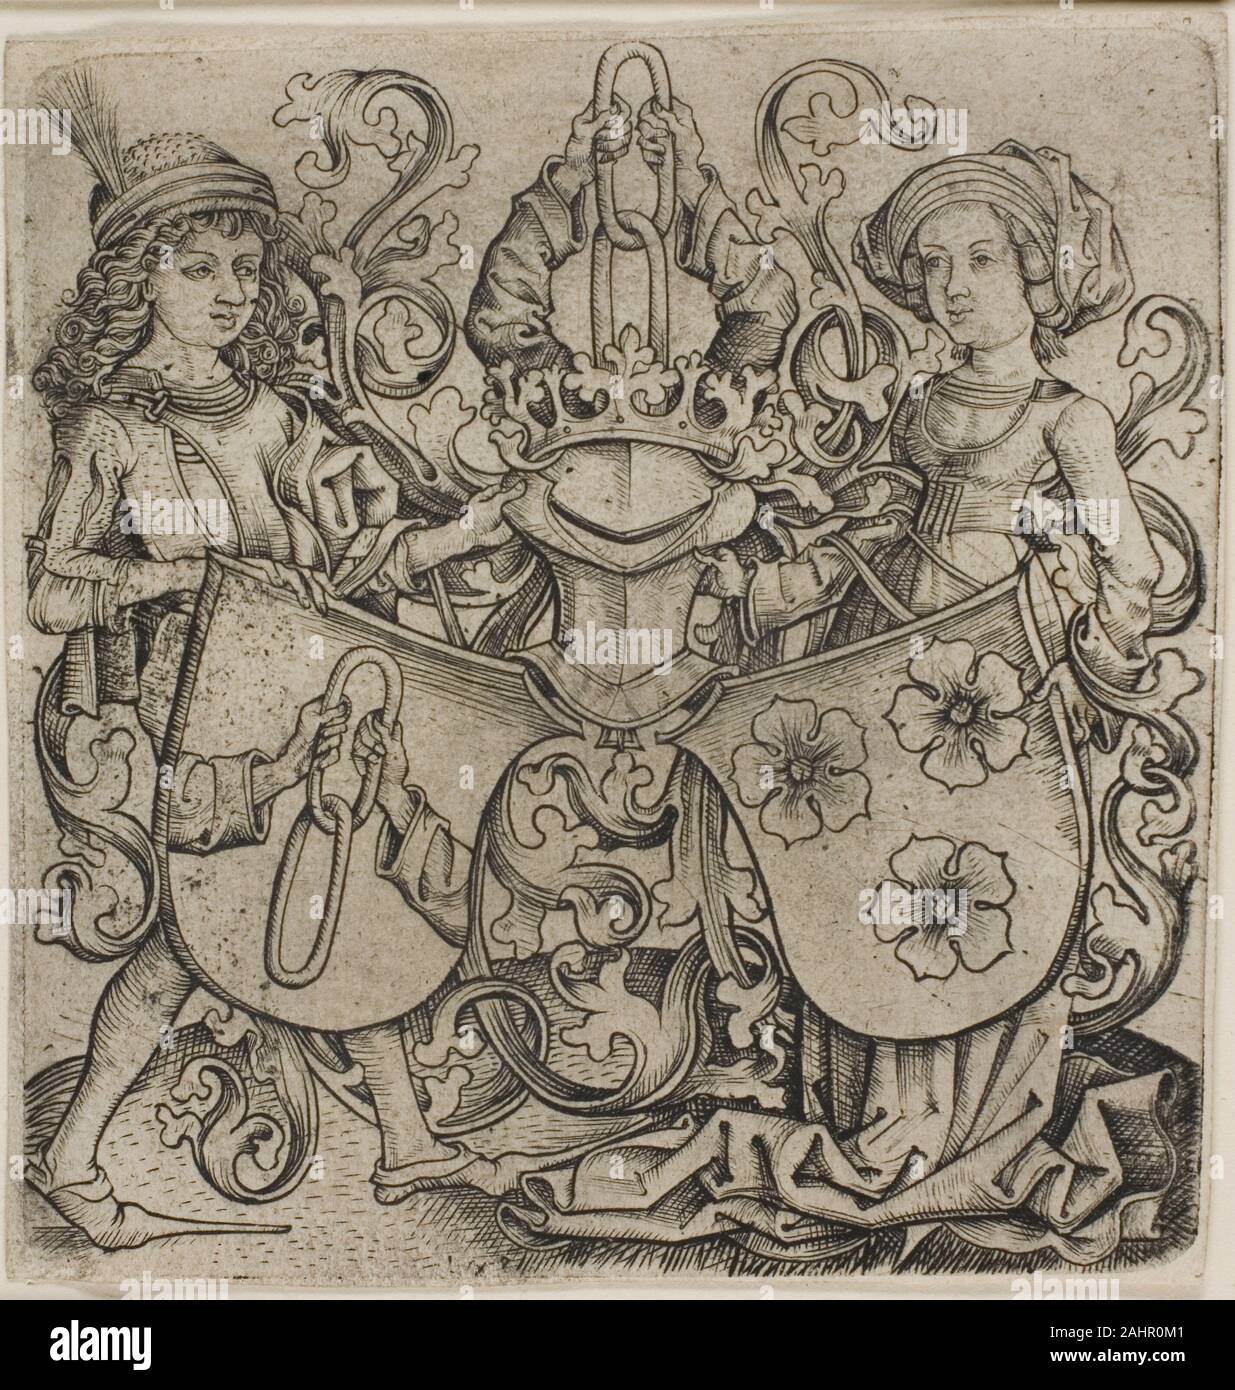 Monogrammist b. g.. Coat of Arms of Rohrbach and Eilge von Holzhausen. 1470–1485. Bayern. Engraving in black on buff laid paper This unidentified German artist signed his prints with a monogram. Here he may have copied a coat of arms designed by the more famous, yet equally mysterious Master of the Amsterdam Cabinet. Originally this work was interpreted as commemorating the 1466 marriage of Bernhard von Rohrbach and Adelgunde von Holzhausen. However, this Frankfurt family adopted the helmet on their crest in 1470; the couple’s son likely commissioned the sheet as a bookplate. When the engravin Stock Photo